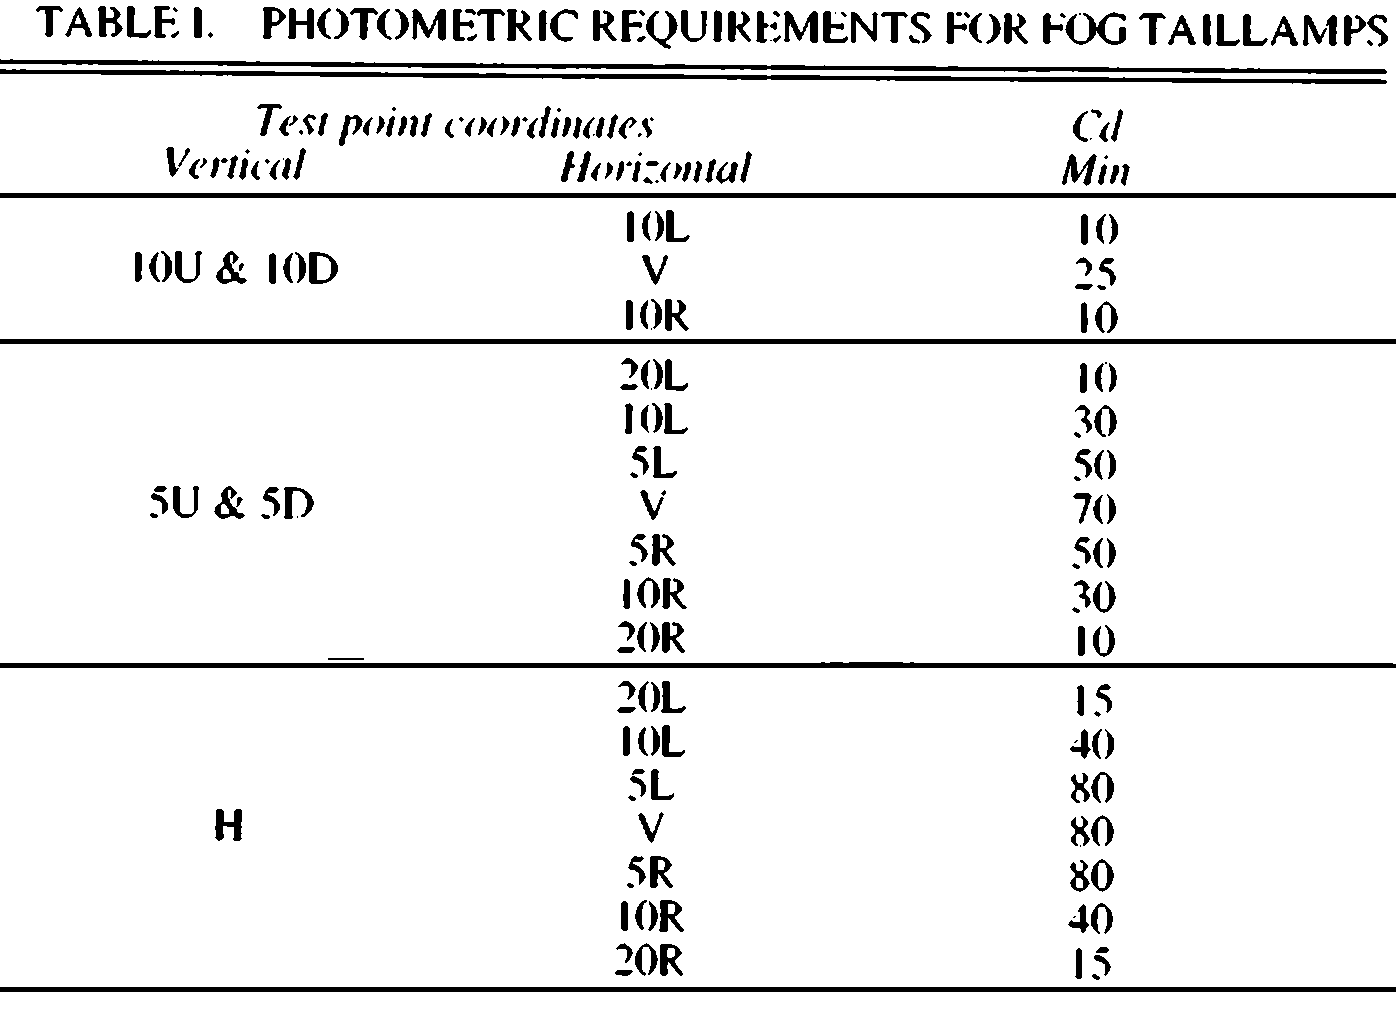 Image 1 within § 743. Photometric Test Requirements.